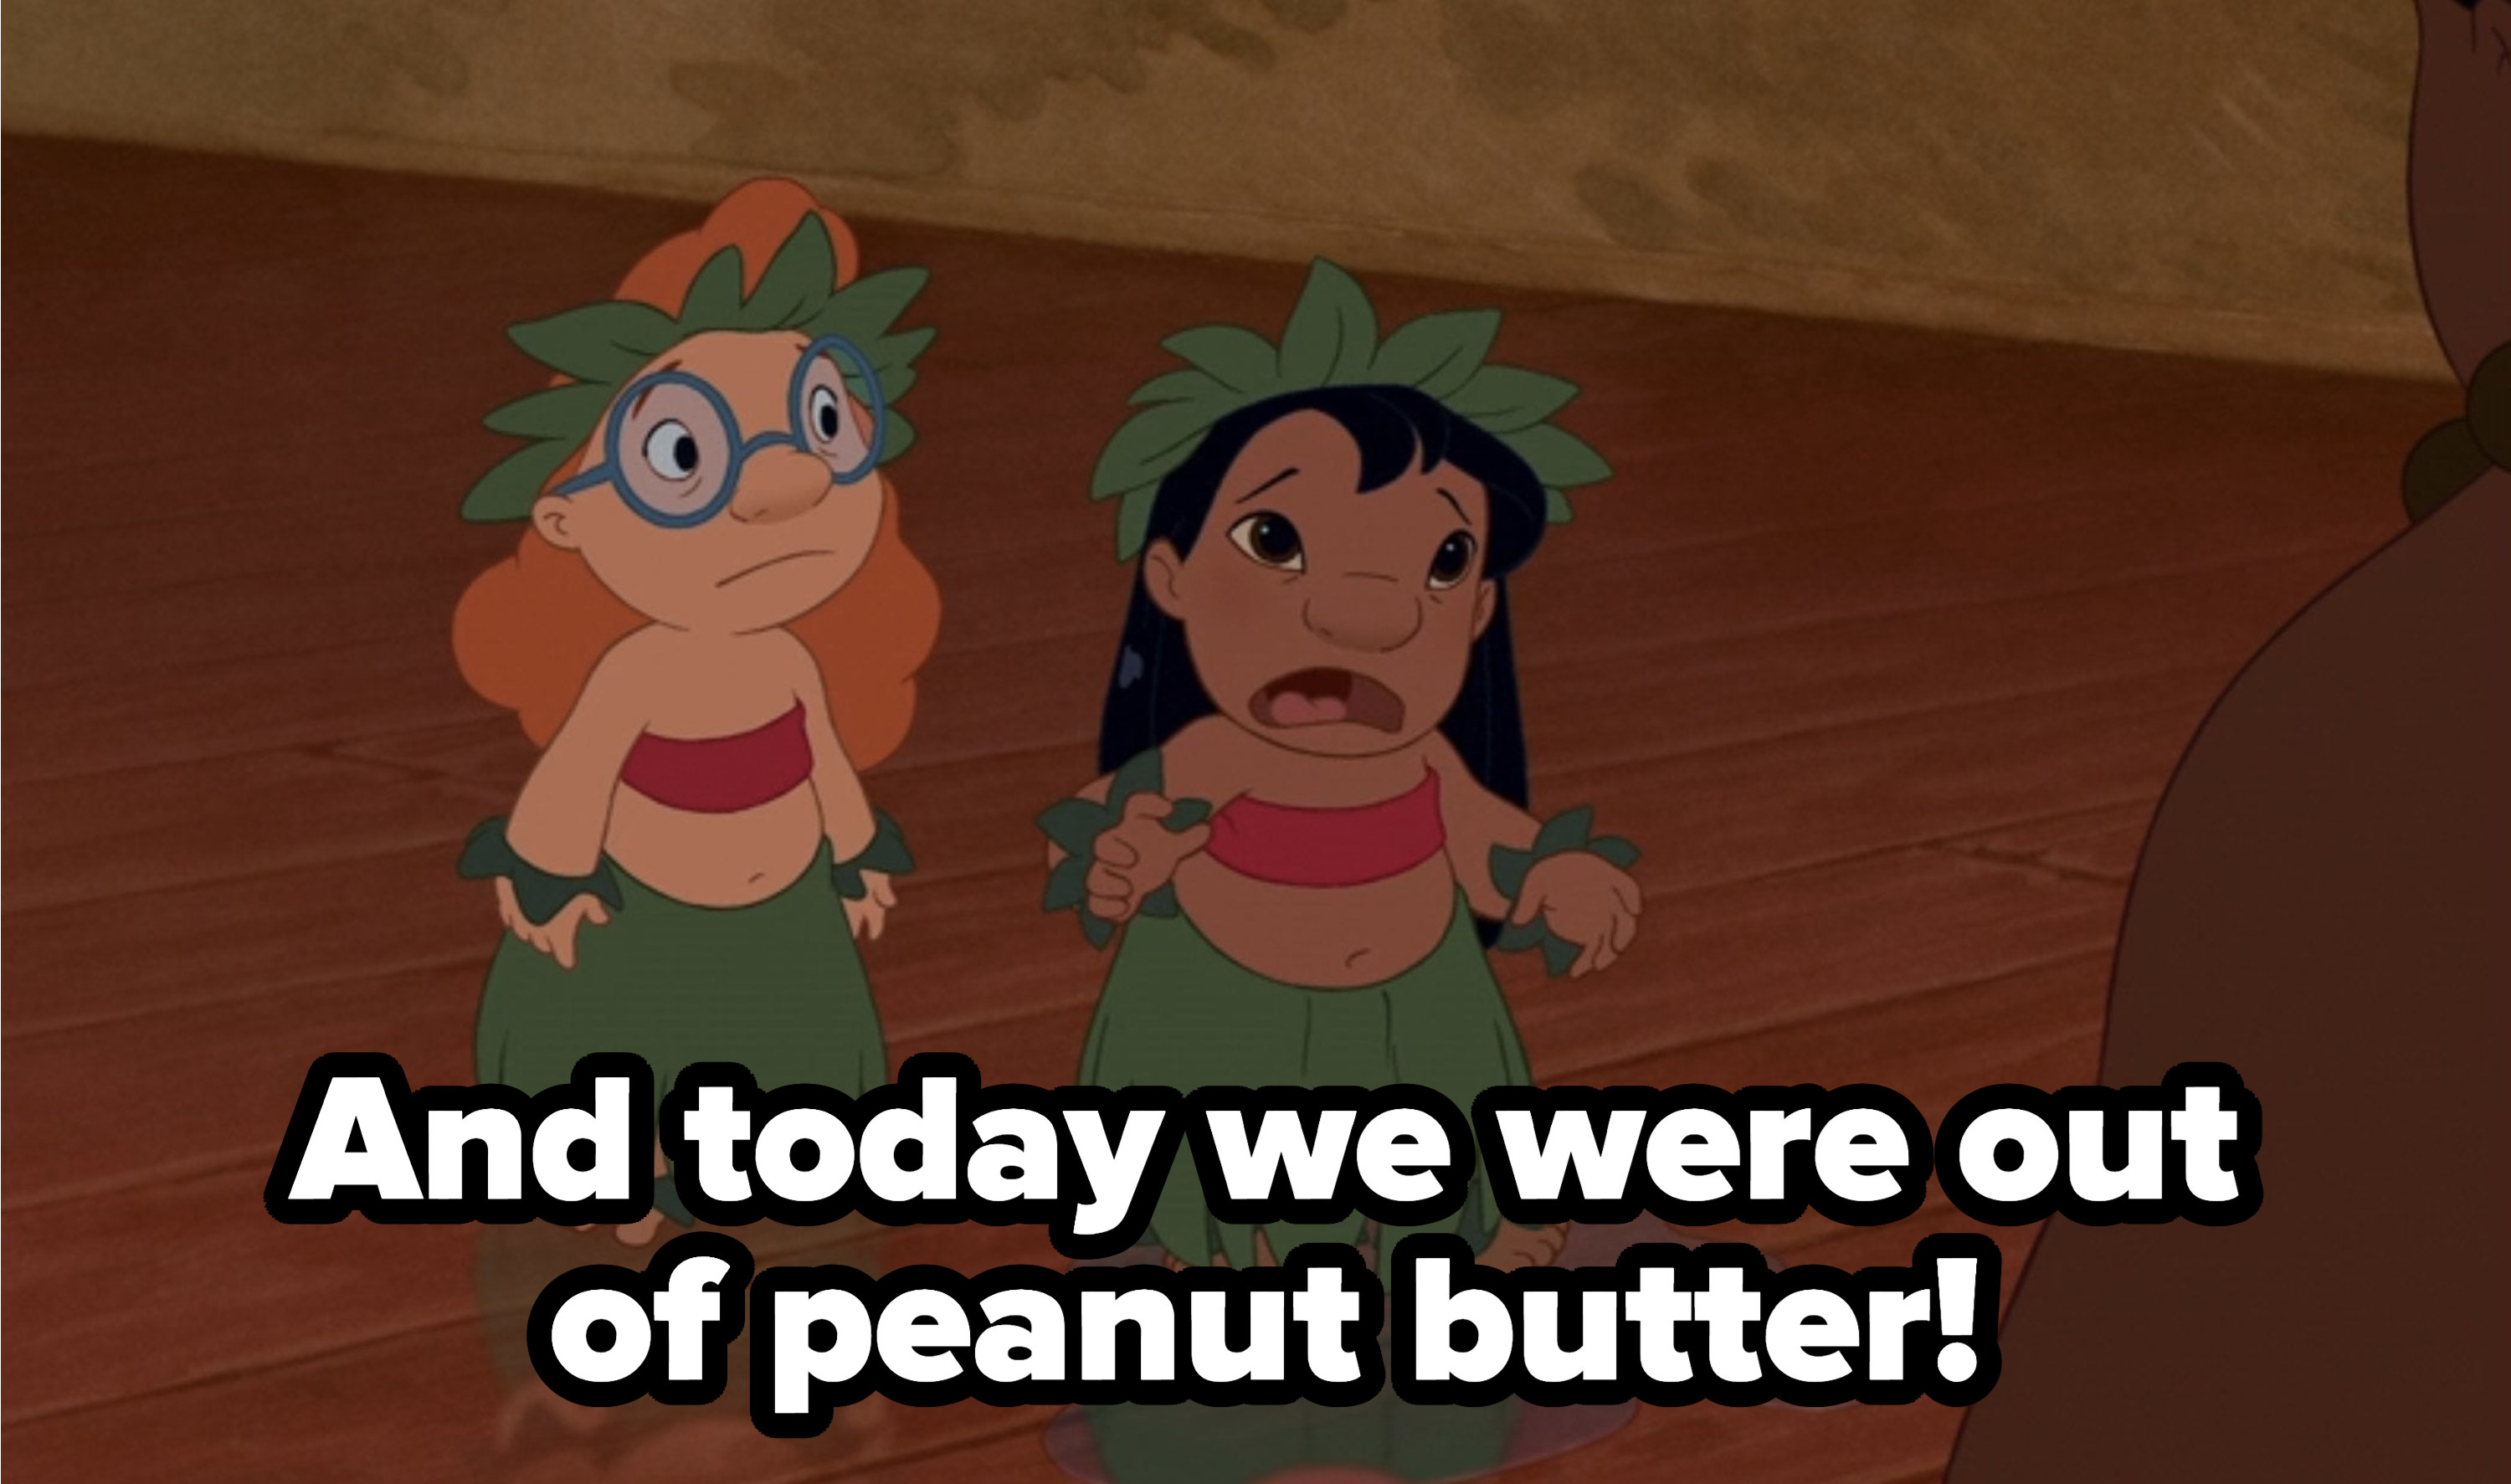 Lilo saying And today we were out of peanut butter!